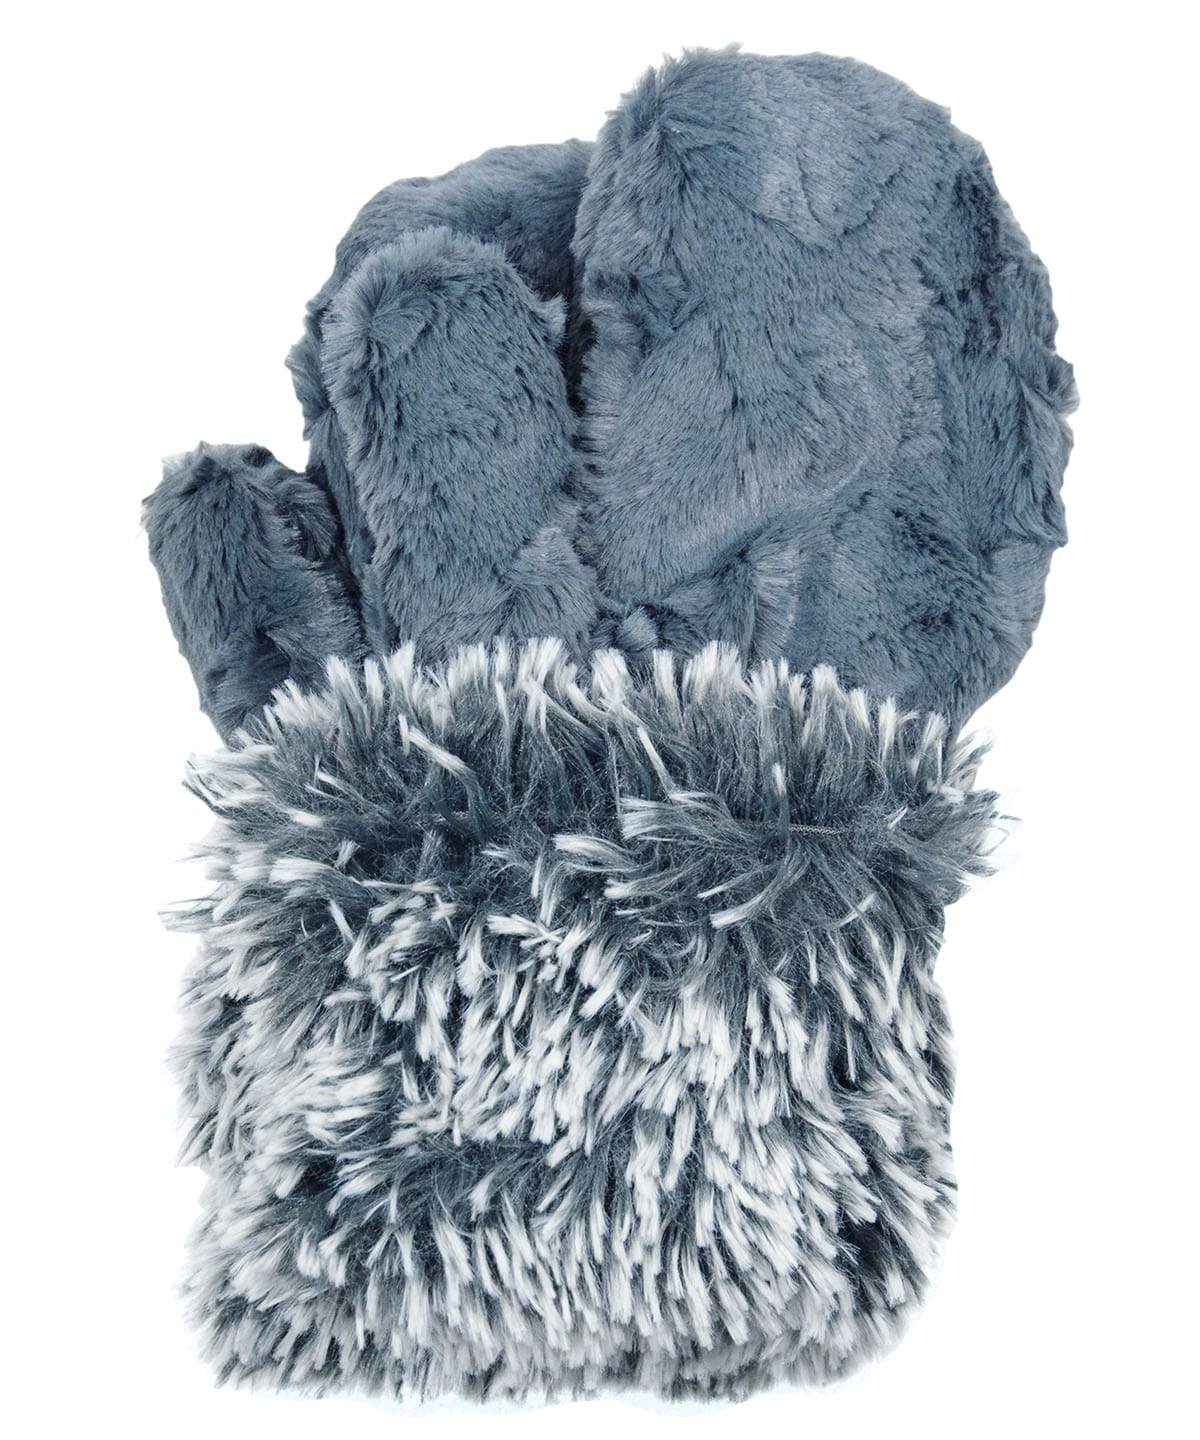 Mittens - Fox Faux Fur (Cuff Only) - (Blue Steel Combos - Only Three Left!)